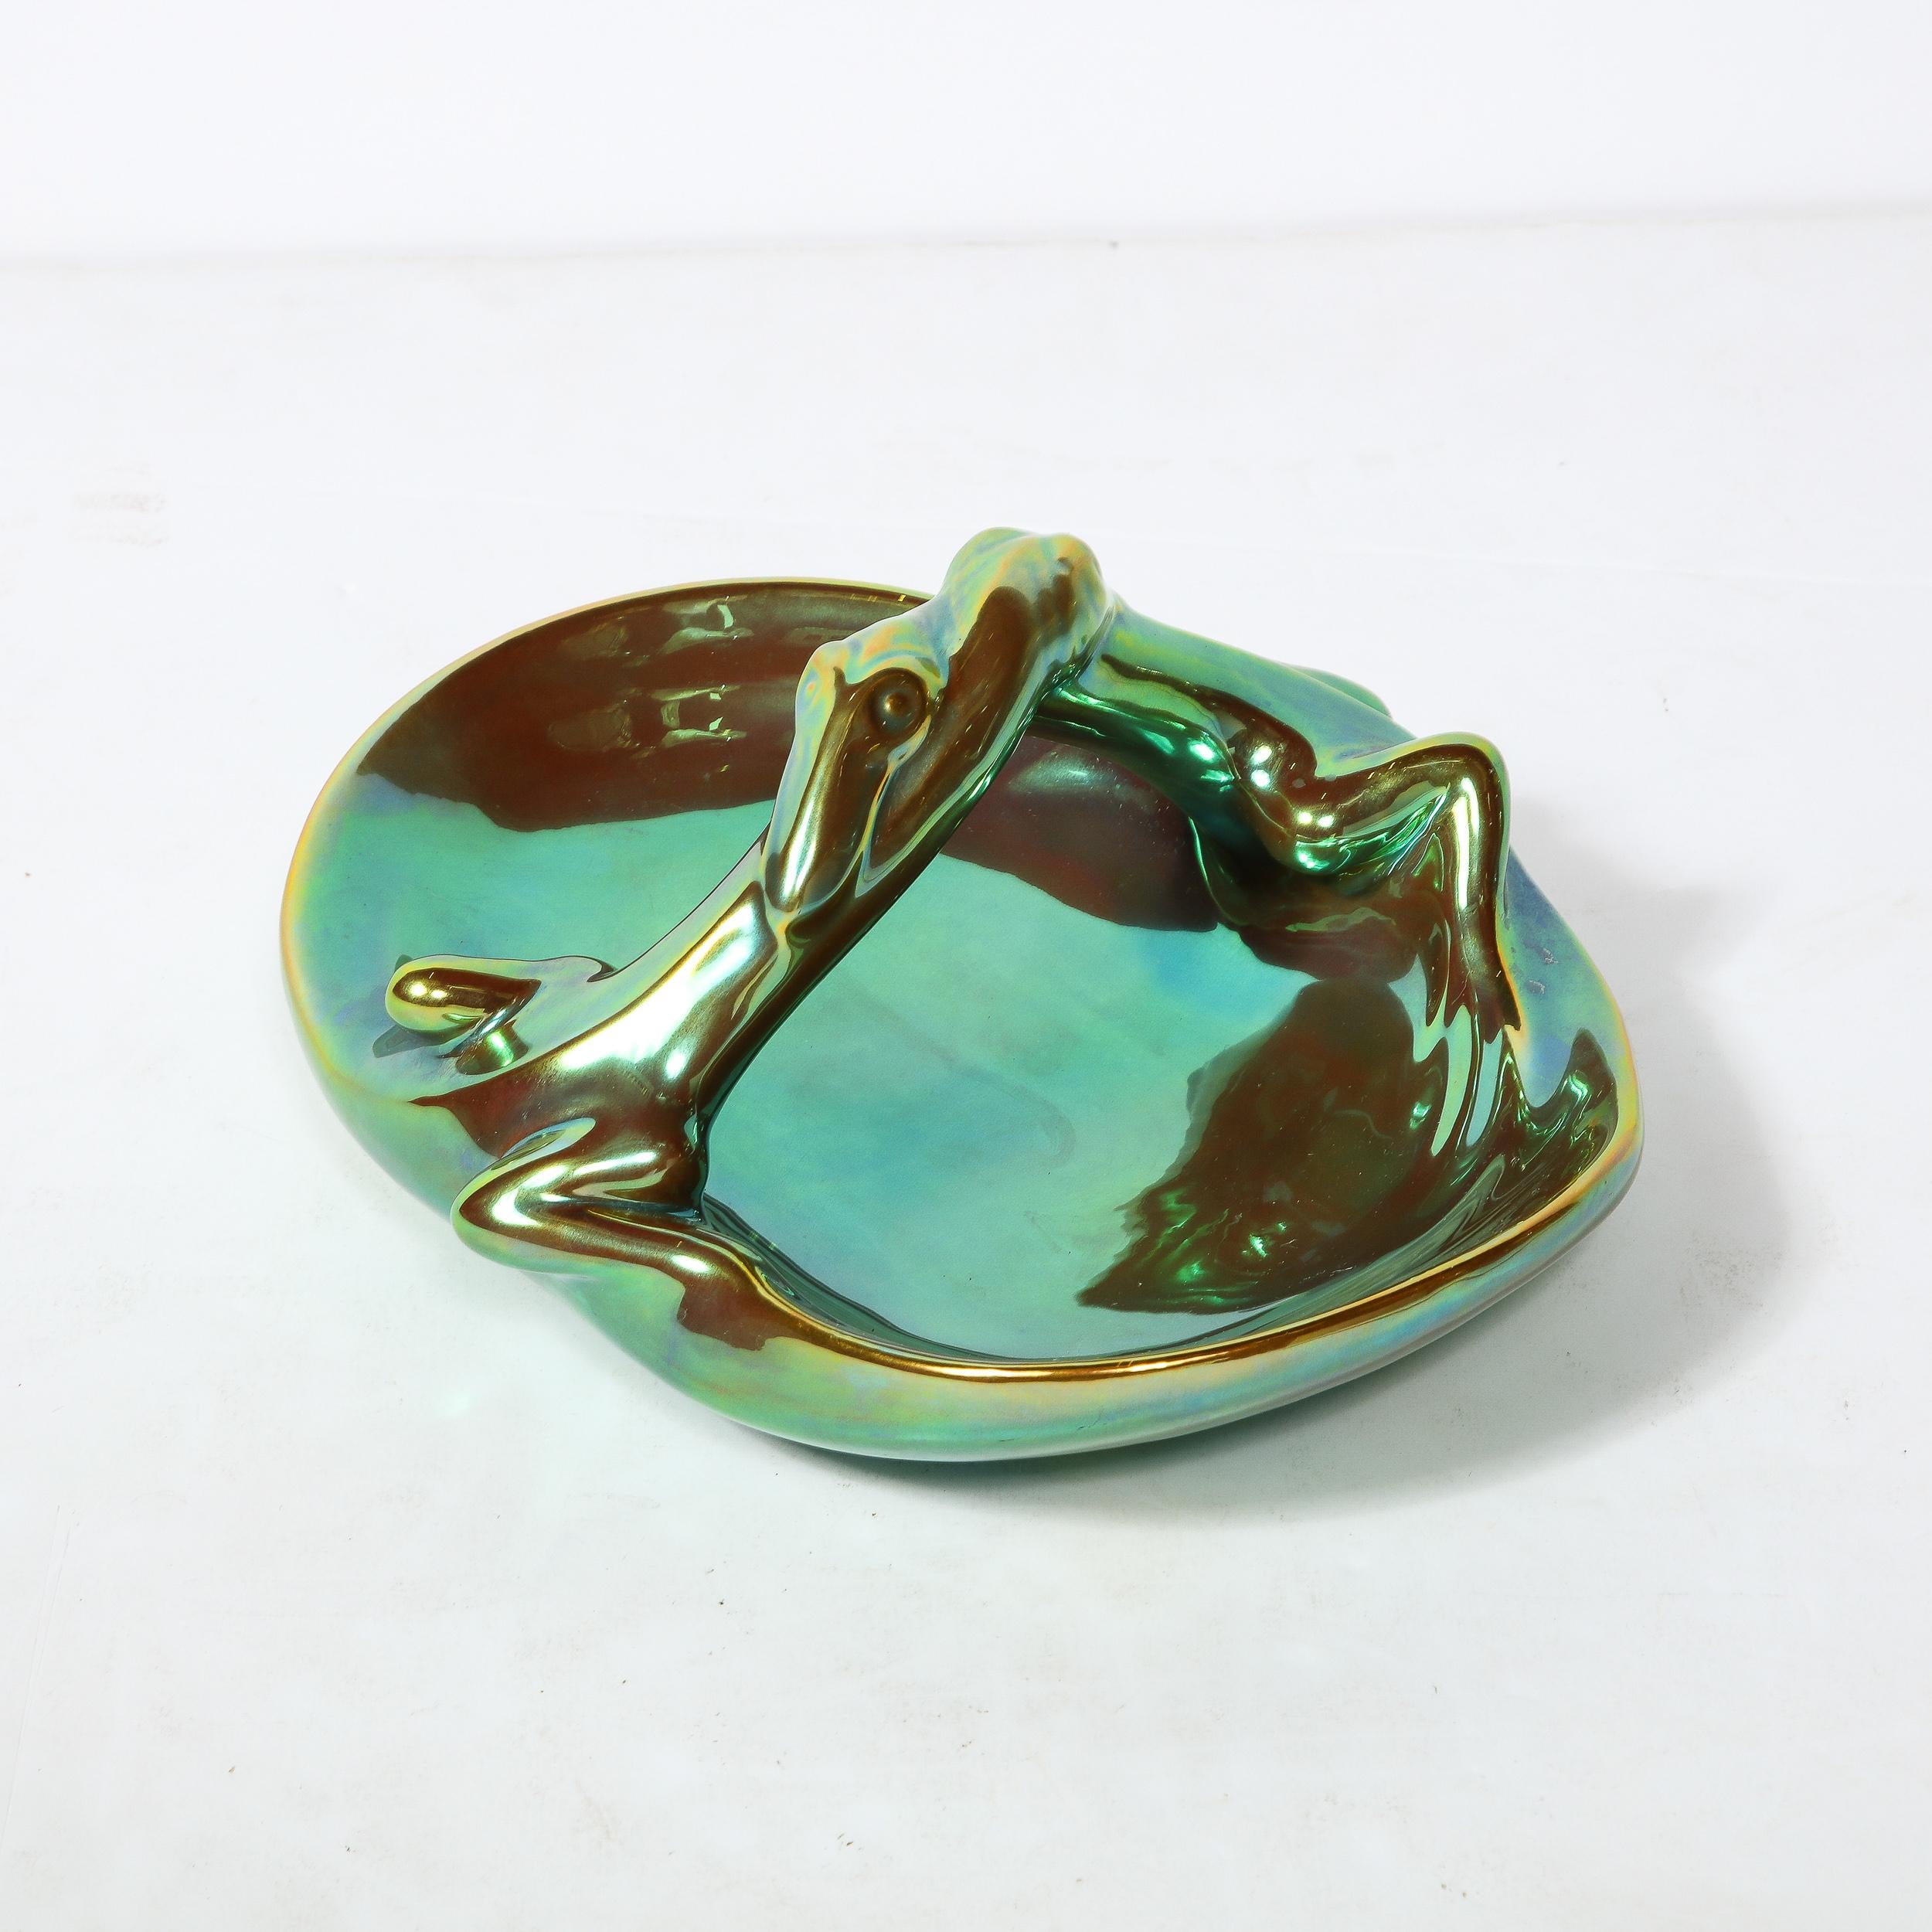 Hungarian Art Deco Basket Form Ceramic Dish of Entwined Lizards by Zsolnay Eosin For Sale